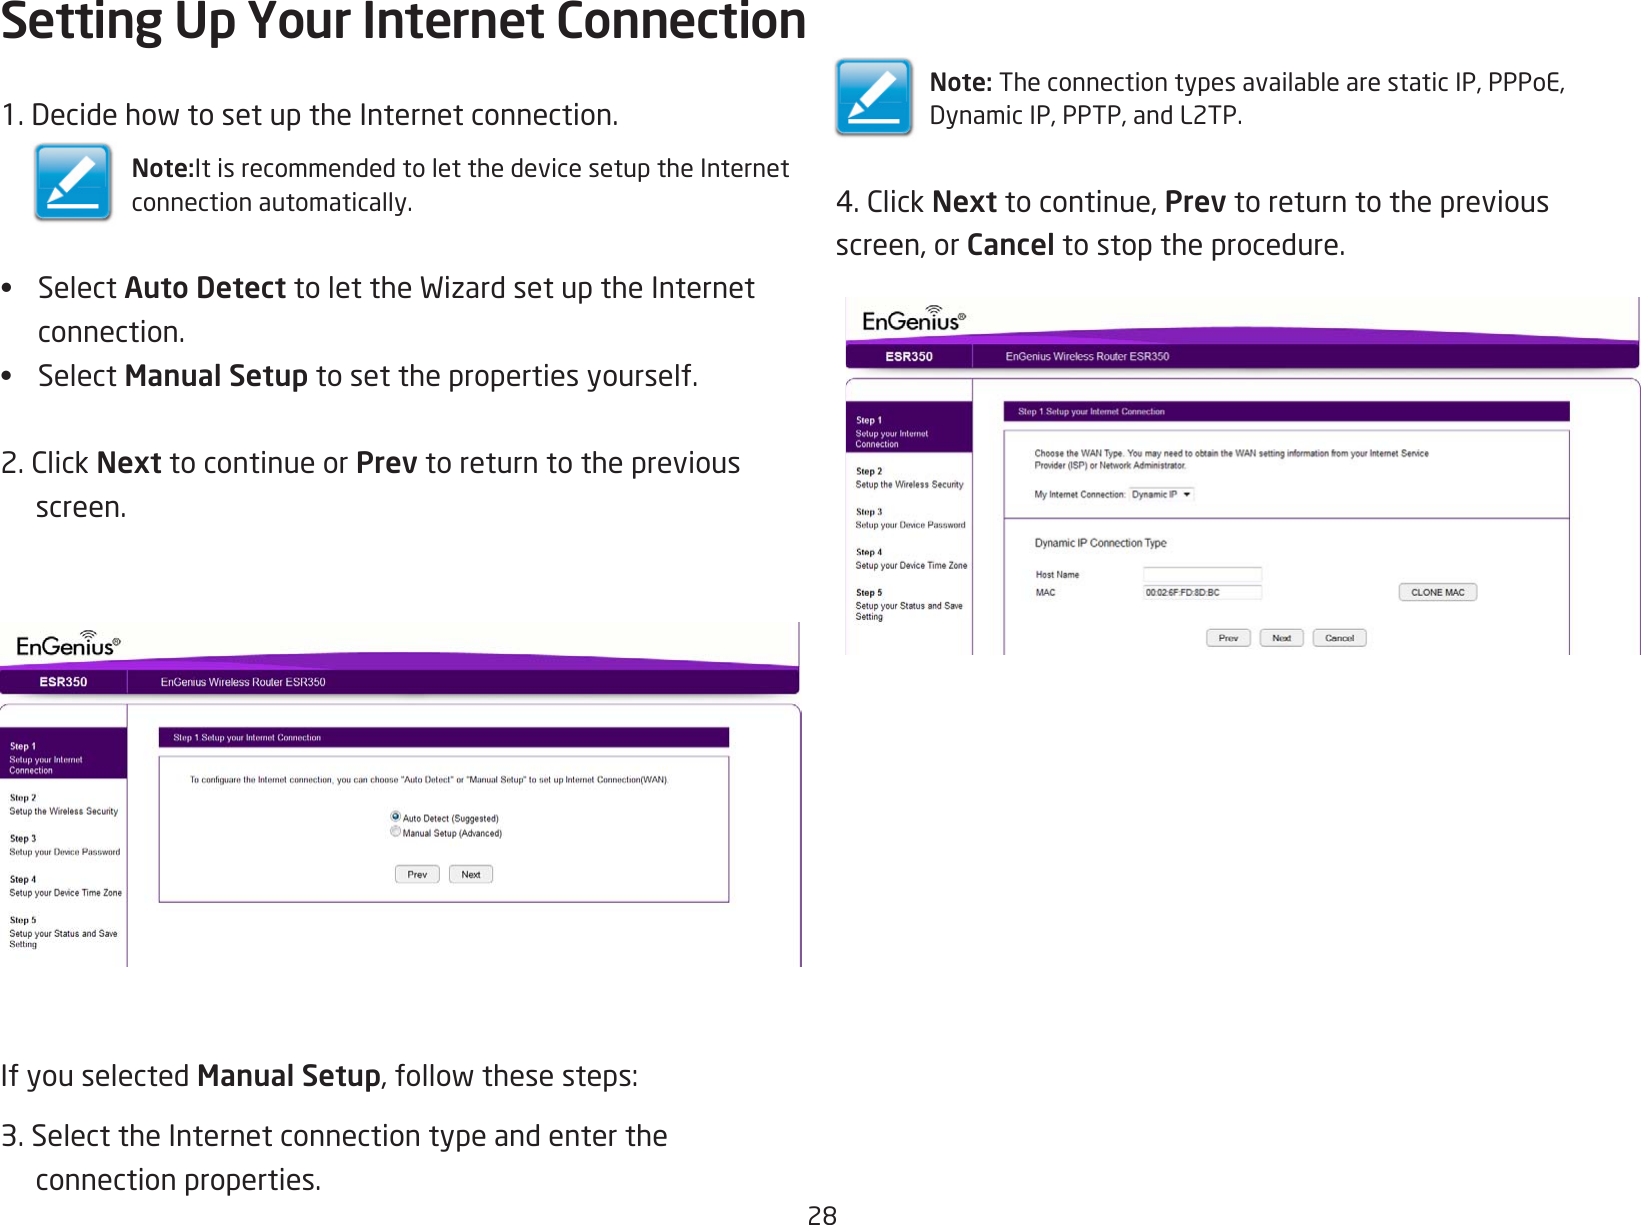 281.DecidehowtosetuptheInternetconnection.Note:It is recommended to let the device setup the Internetconnection automatically.• Select Auto DetecttolettheWizardsetuptheInternetconnection.• Select Manual Setup to set the properties yourself.2.ClickNext to continue or Prev to return to the previous screen.If you selected Manual Setup,followthesesteps:3. Select the Internet connection type and enter the  connection properties.Setting Up Your Internet ConnectionNote:TheconnectiontypesavailablearestaticIP,PPPoE,DynamicIP,PPTP,andL2TP.4.ClickNext to continue, Prev to return to the previousscreen, or Cancel to stop the procedure.